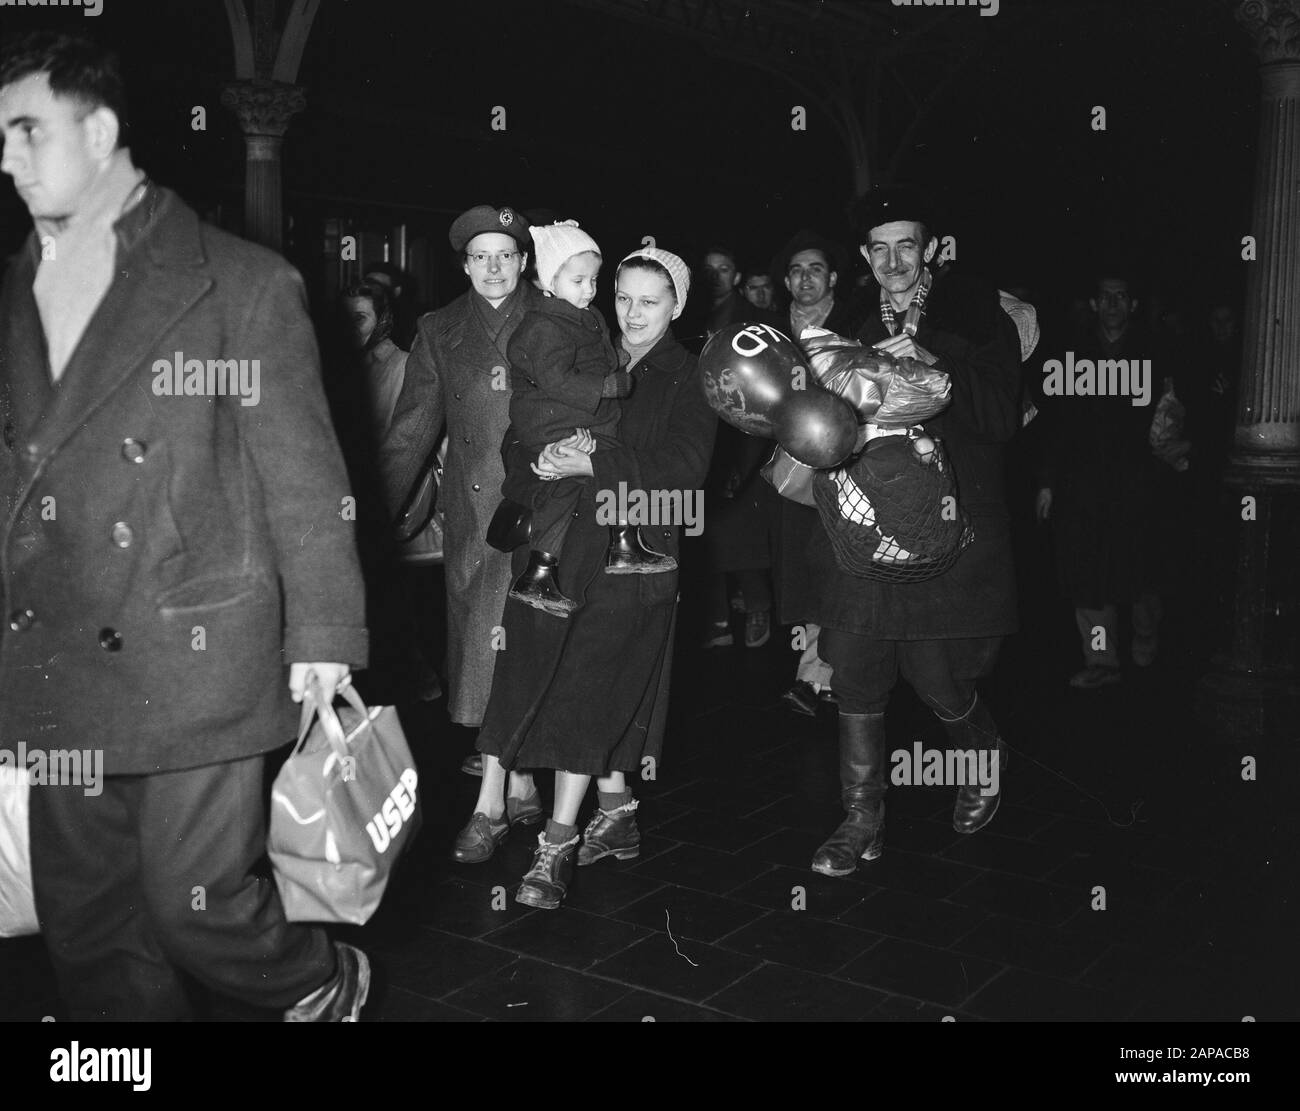 Arrival third group of Hungarian refugees/Affected Date: 25 November 1956 Keywords: ARRIVATE, REFIENCY Stock Photo